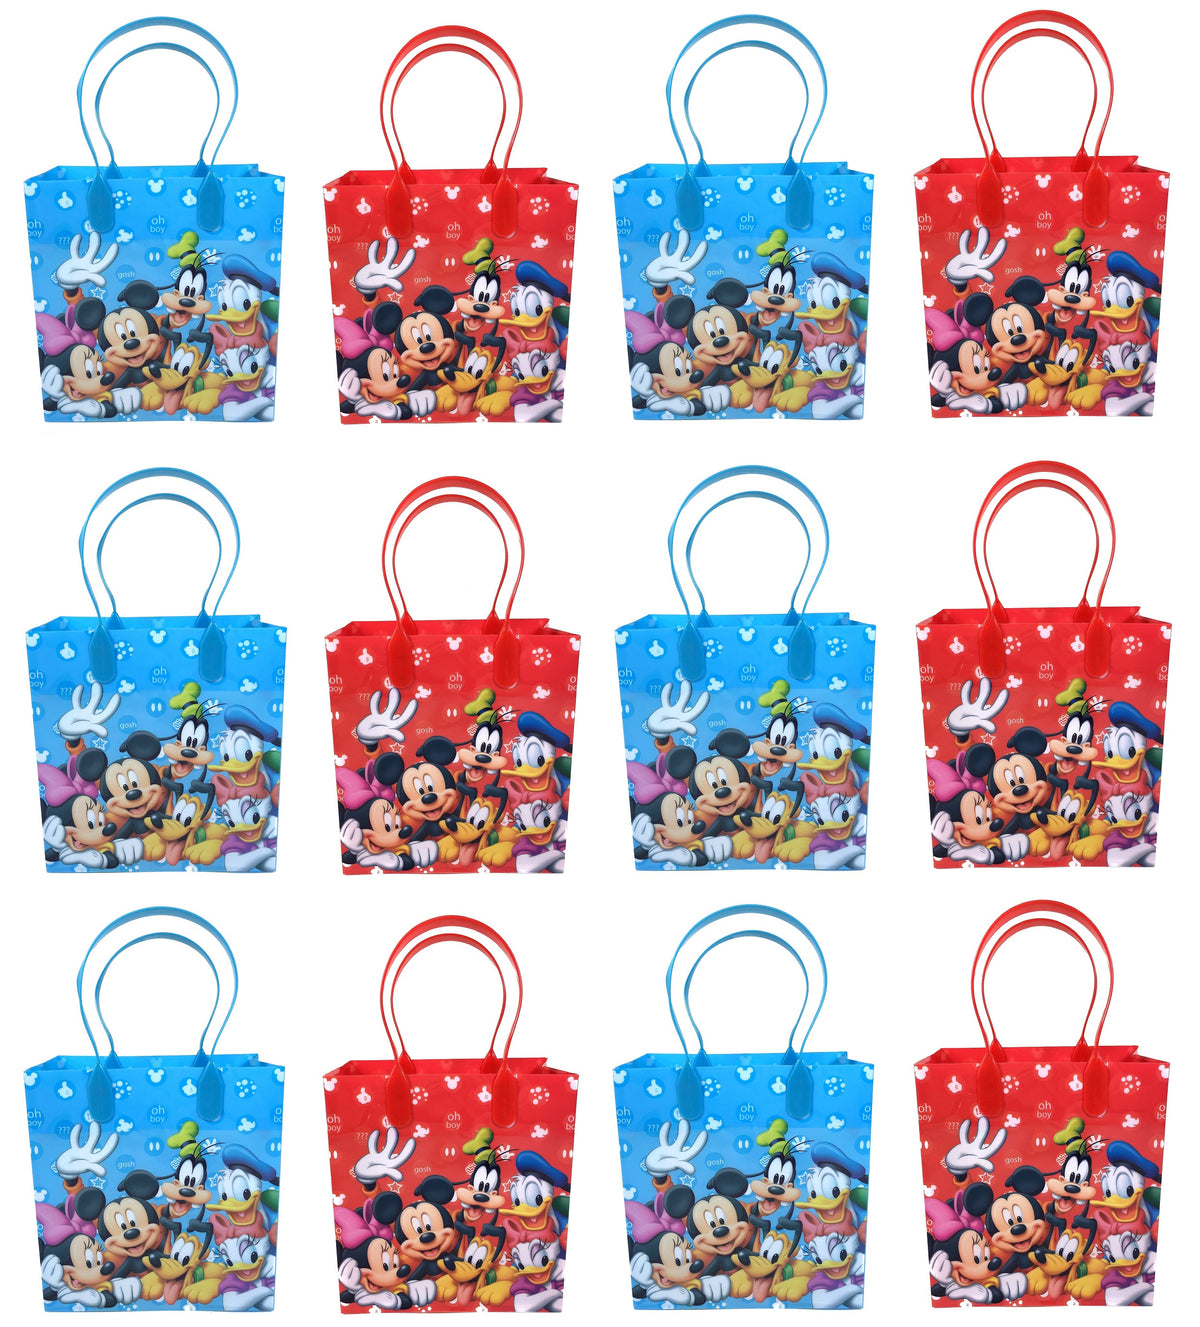 Mickey Mouse Party Favor Bags, Minnie Mouse Party Favor Bags, Mickey  Birthday Bags, Minnie Birthday Bags, Minnie Gift Bags, Mickey Gift Bags -  Etsy Sweden